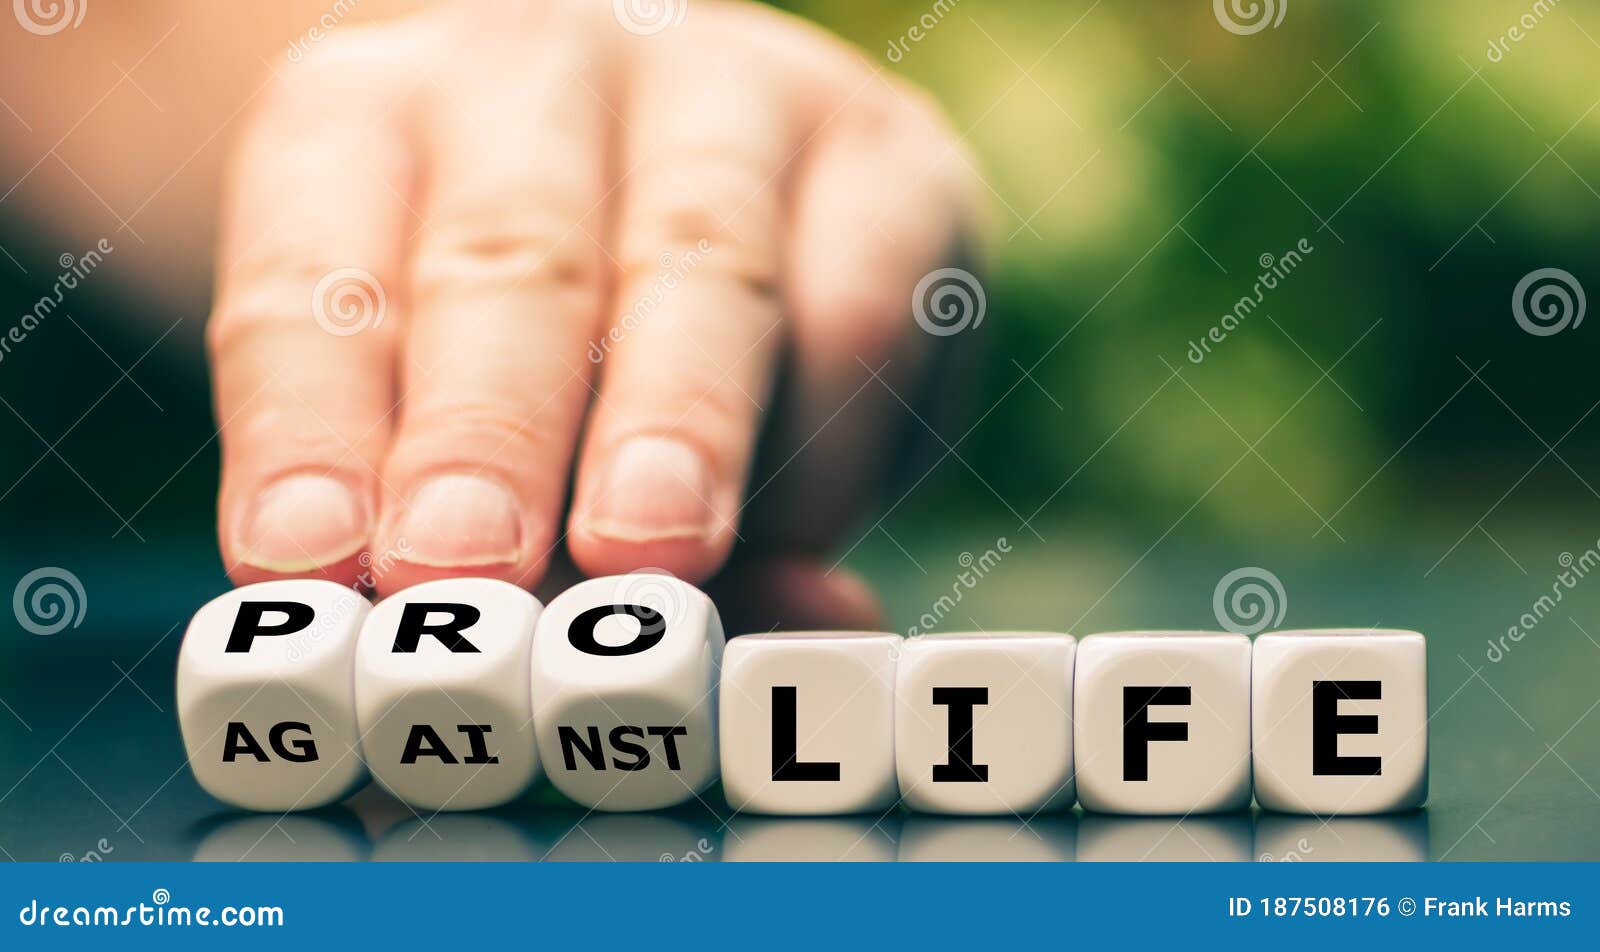 hand turns dice and changes the expression `against life` to `pro life`.